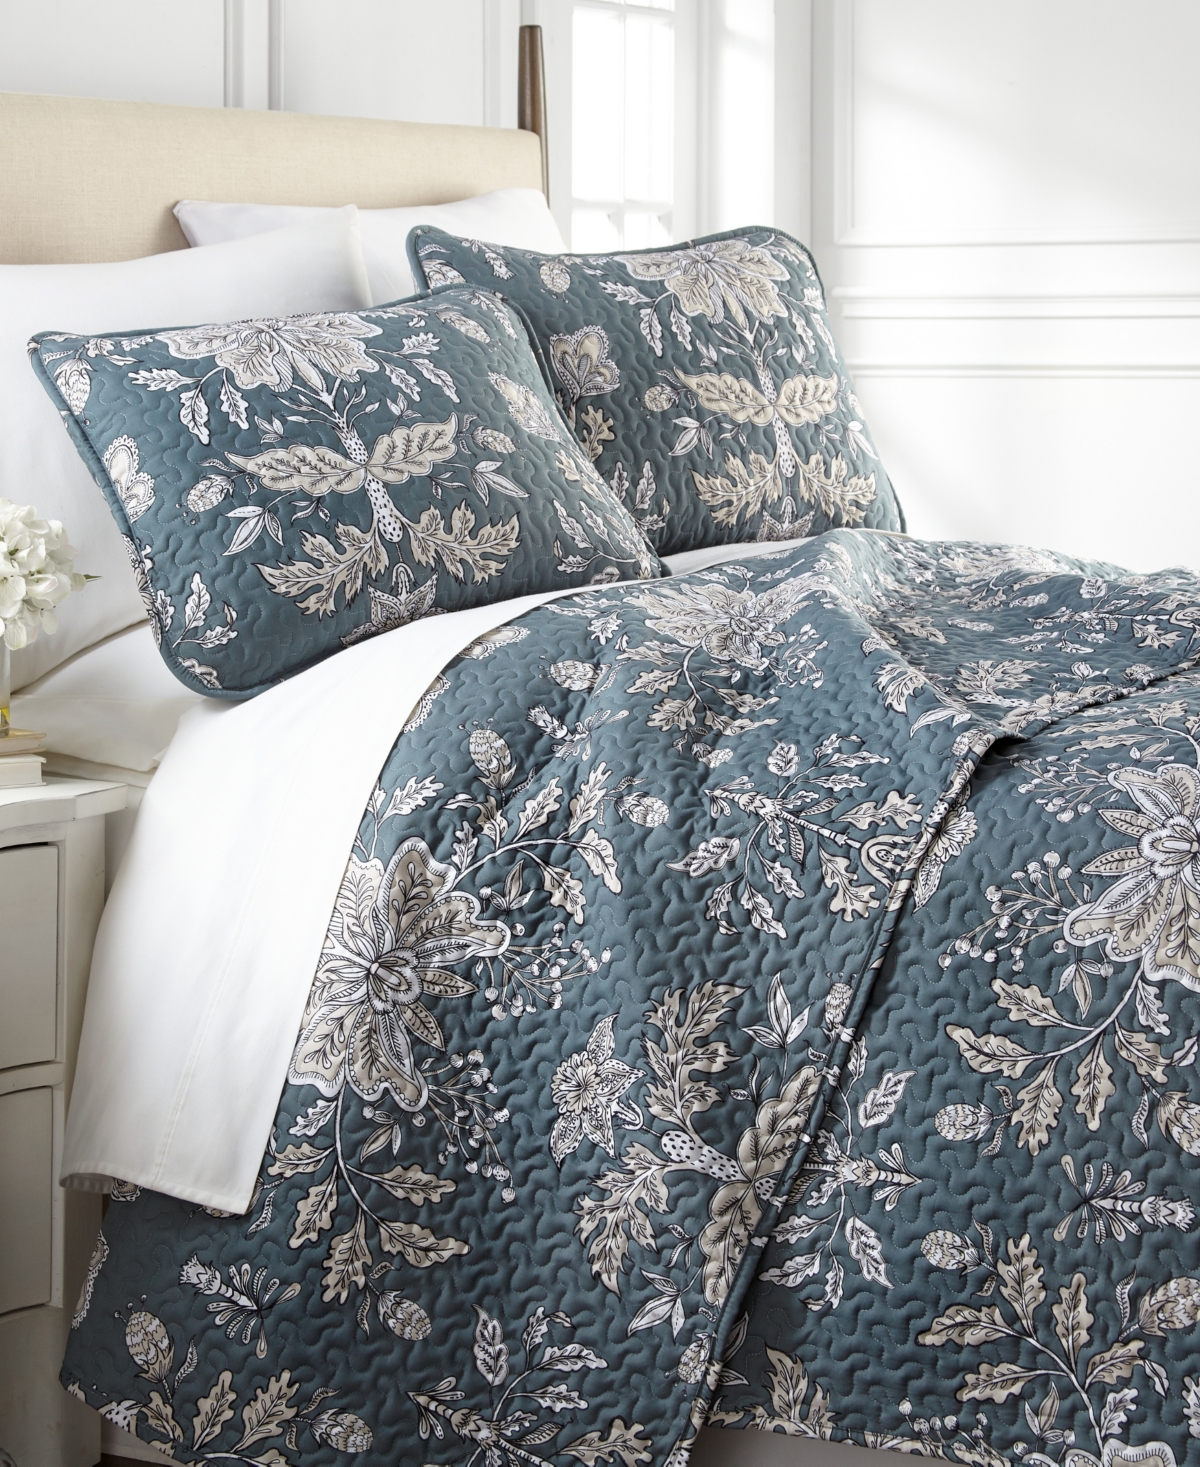 Southshore Fine Linens Vintage-look Garden Quilt And Sham 3 Piece Set, Full Or Queen In Blue